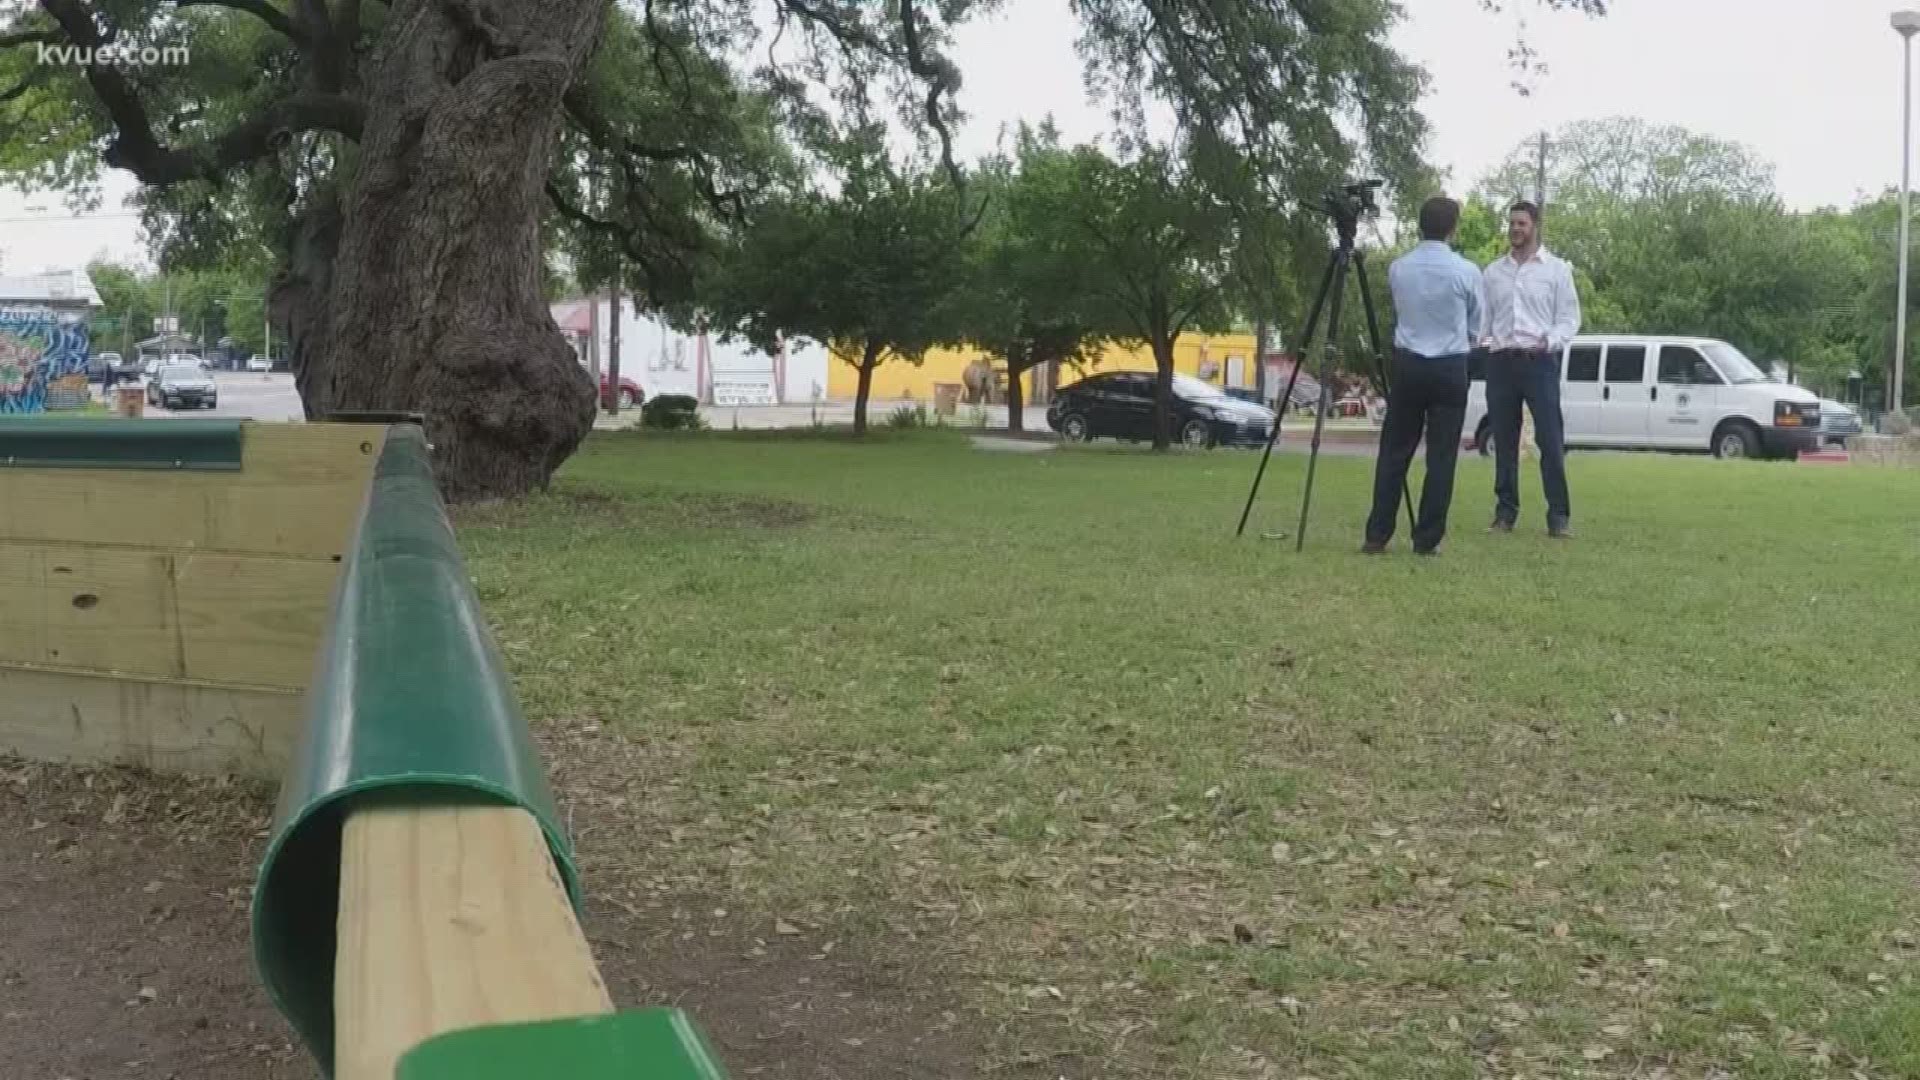 Austin's parks are getting a $20K donation to make improvements.